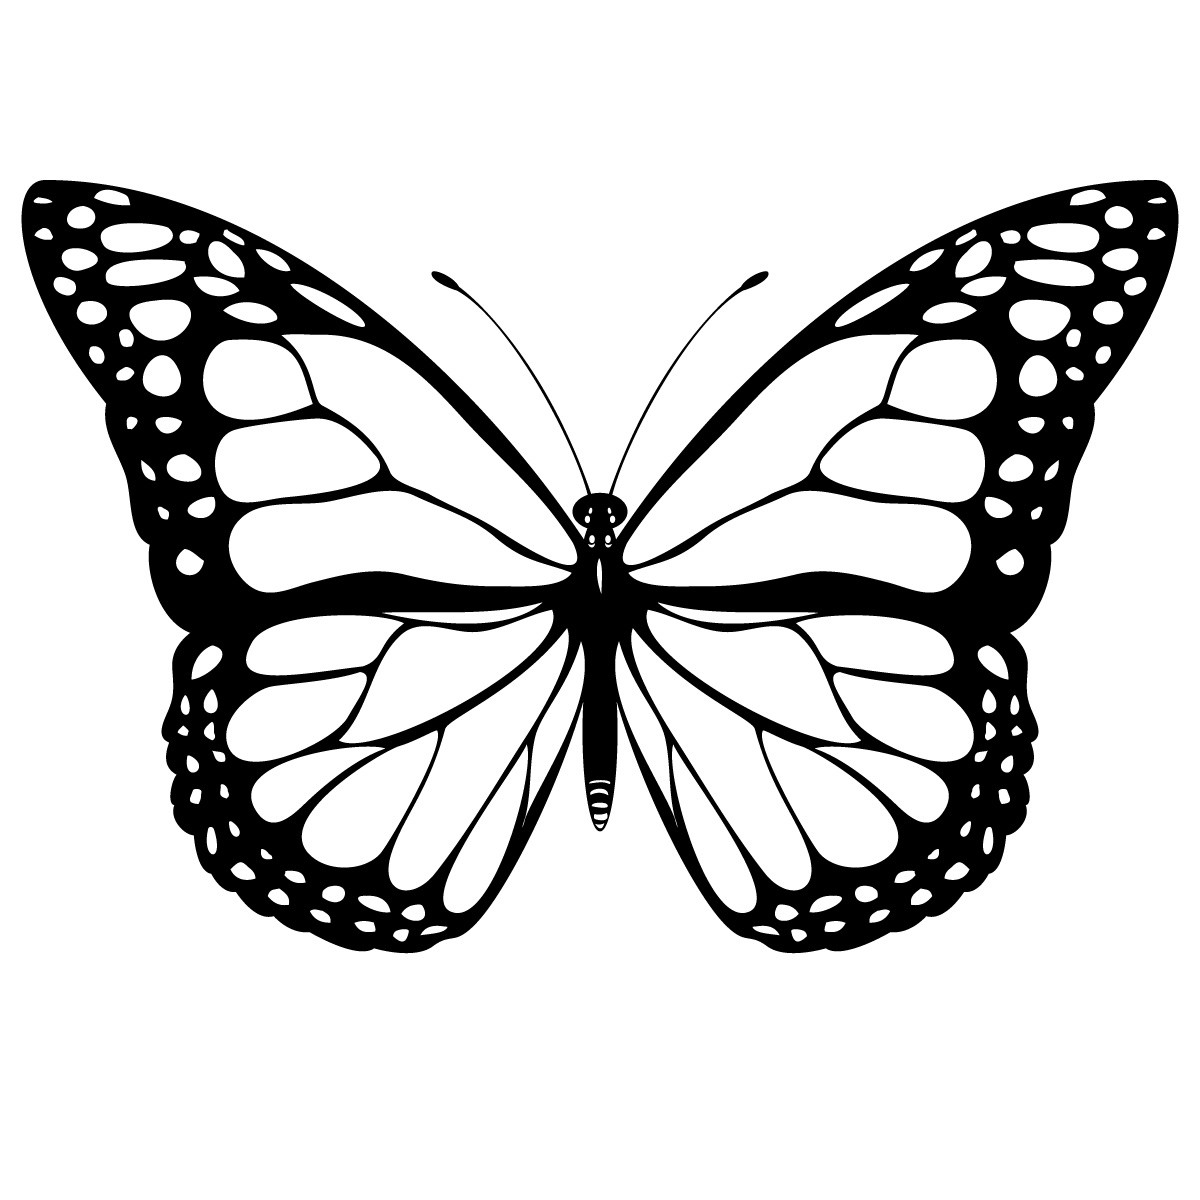 10 Cool Butterfly Drawings Free Cliparts That You Can Download To You